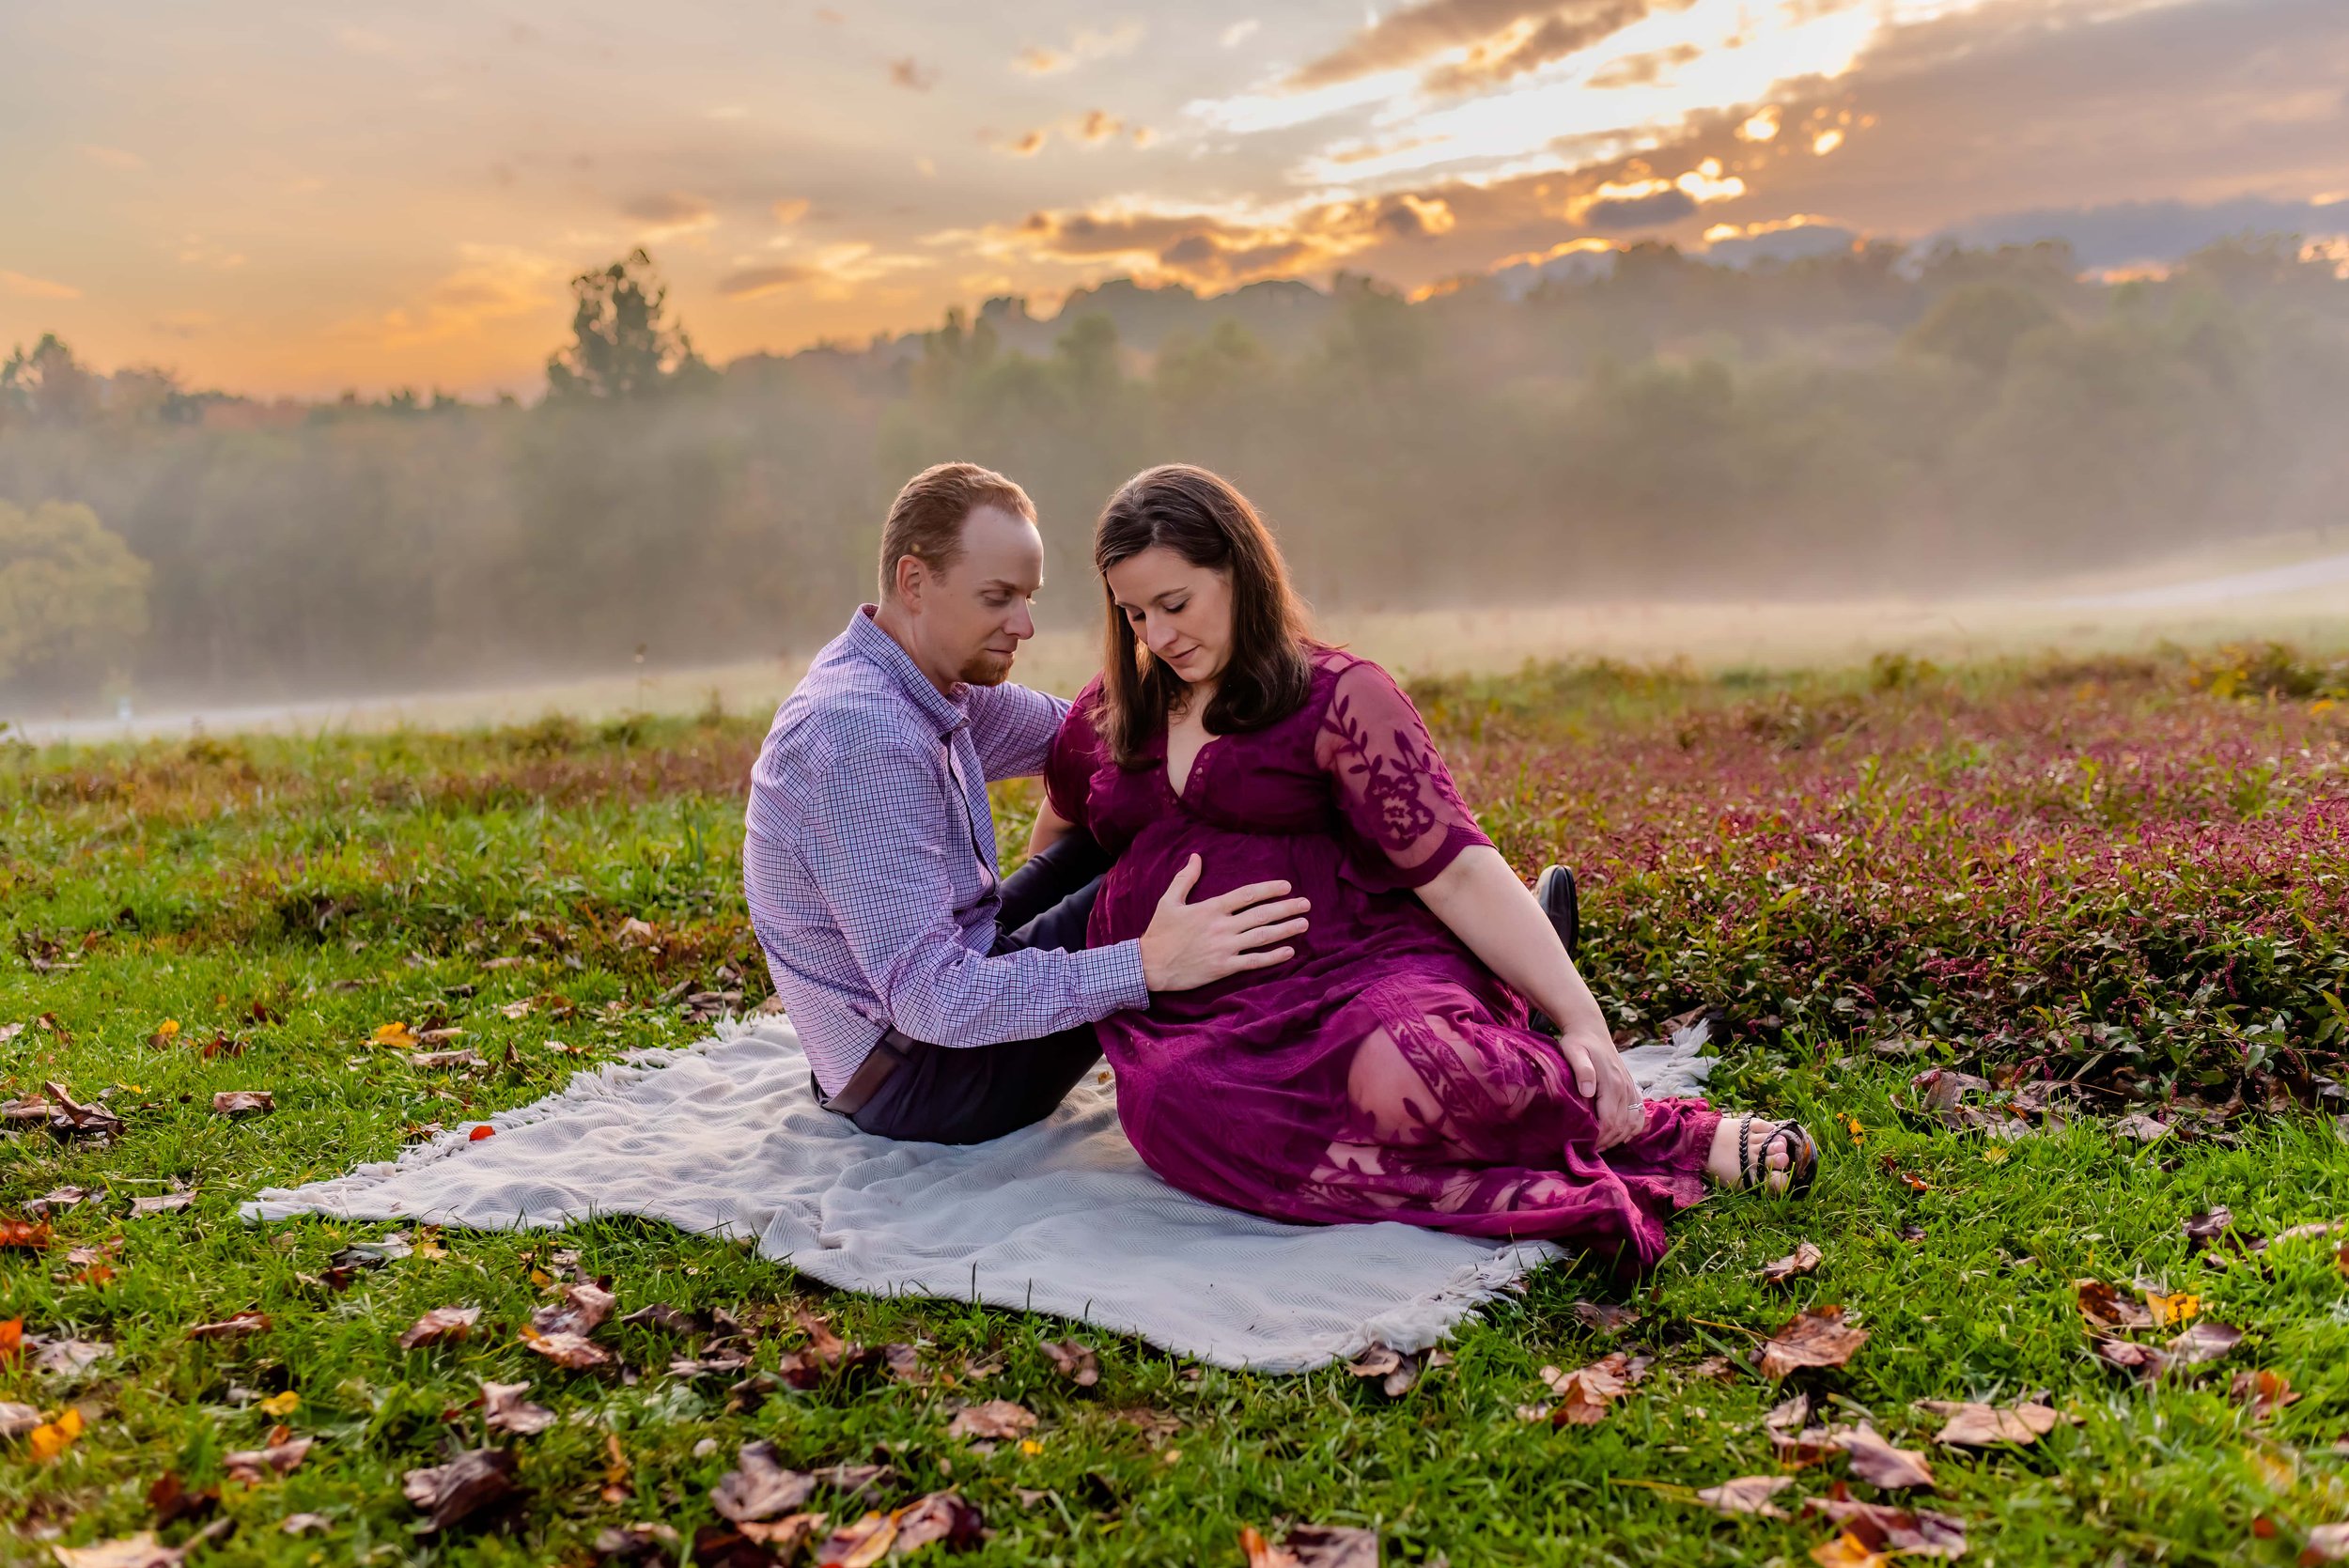 Maryland Maternity Photos - Husband and Wife Sitting in a Field Looking down at her belly 